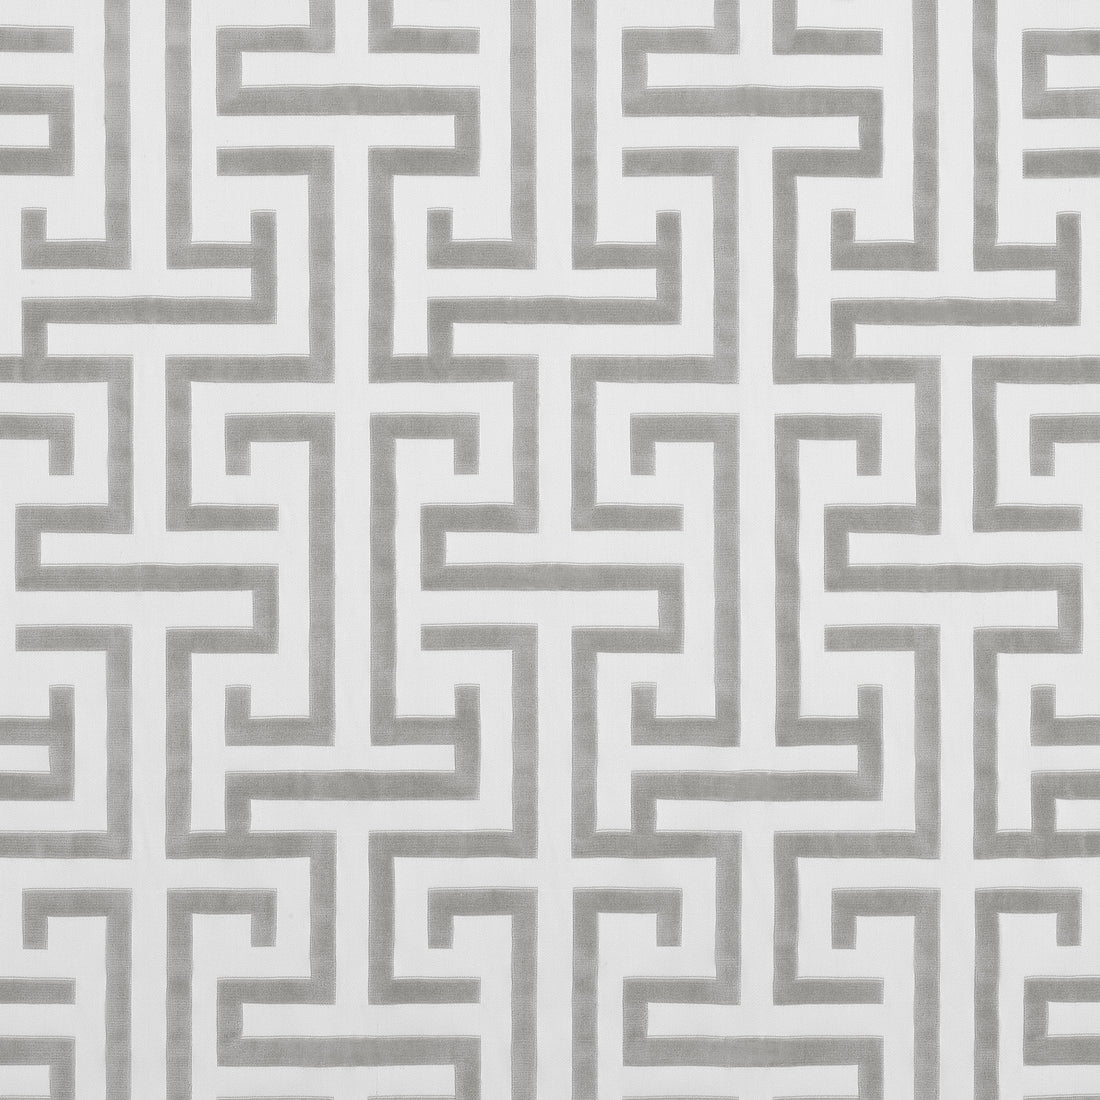 Ming Trail fabric in grey color - pattern number W775475 - by Thibaut in the Dynasty collection